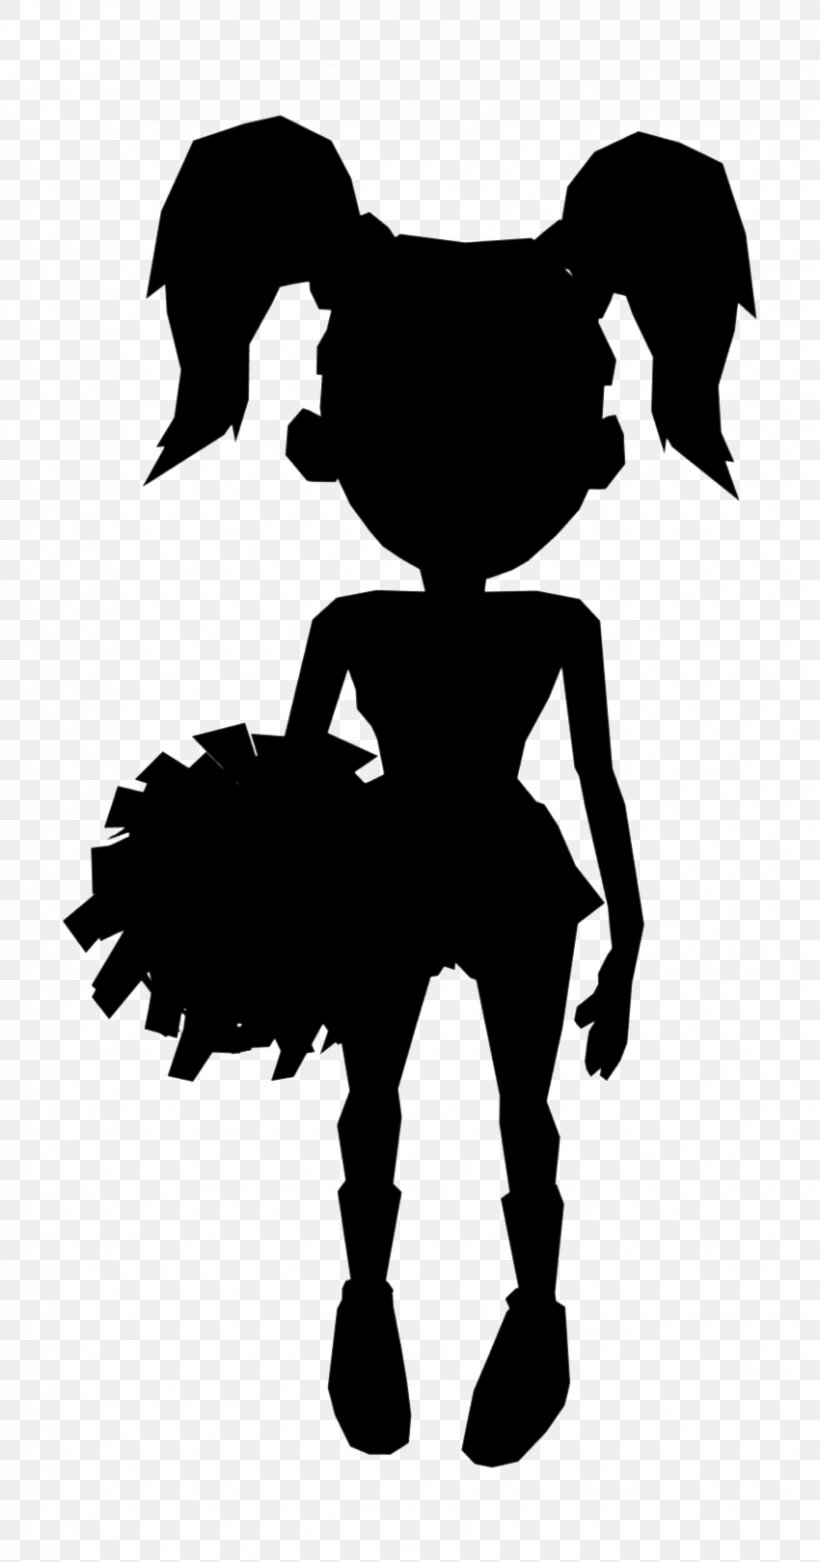 Clip Art Illustration Silhouette Character Fiction, PNG, 850x1620px, Silhouette, Character, Fiction, Fictional Character Download Free